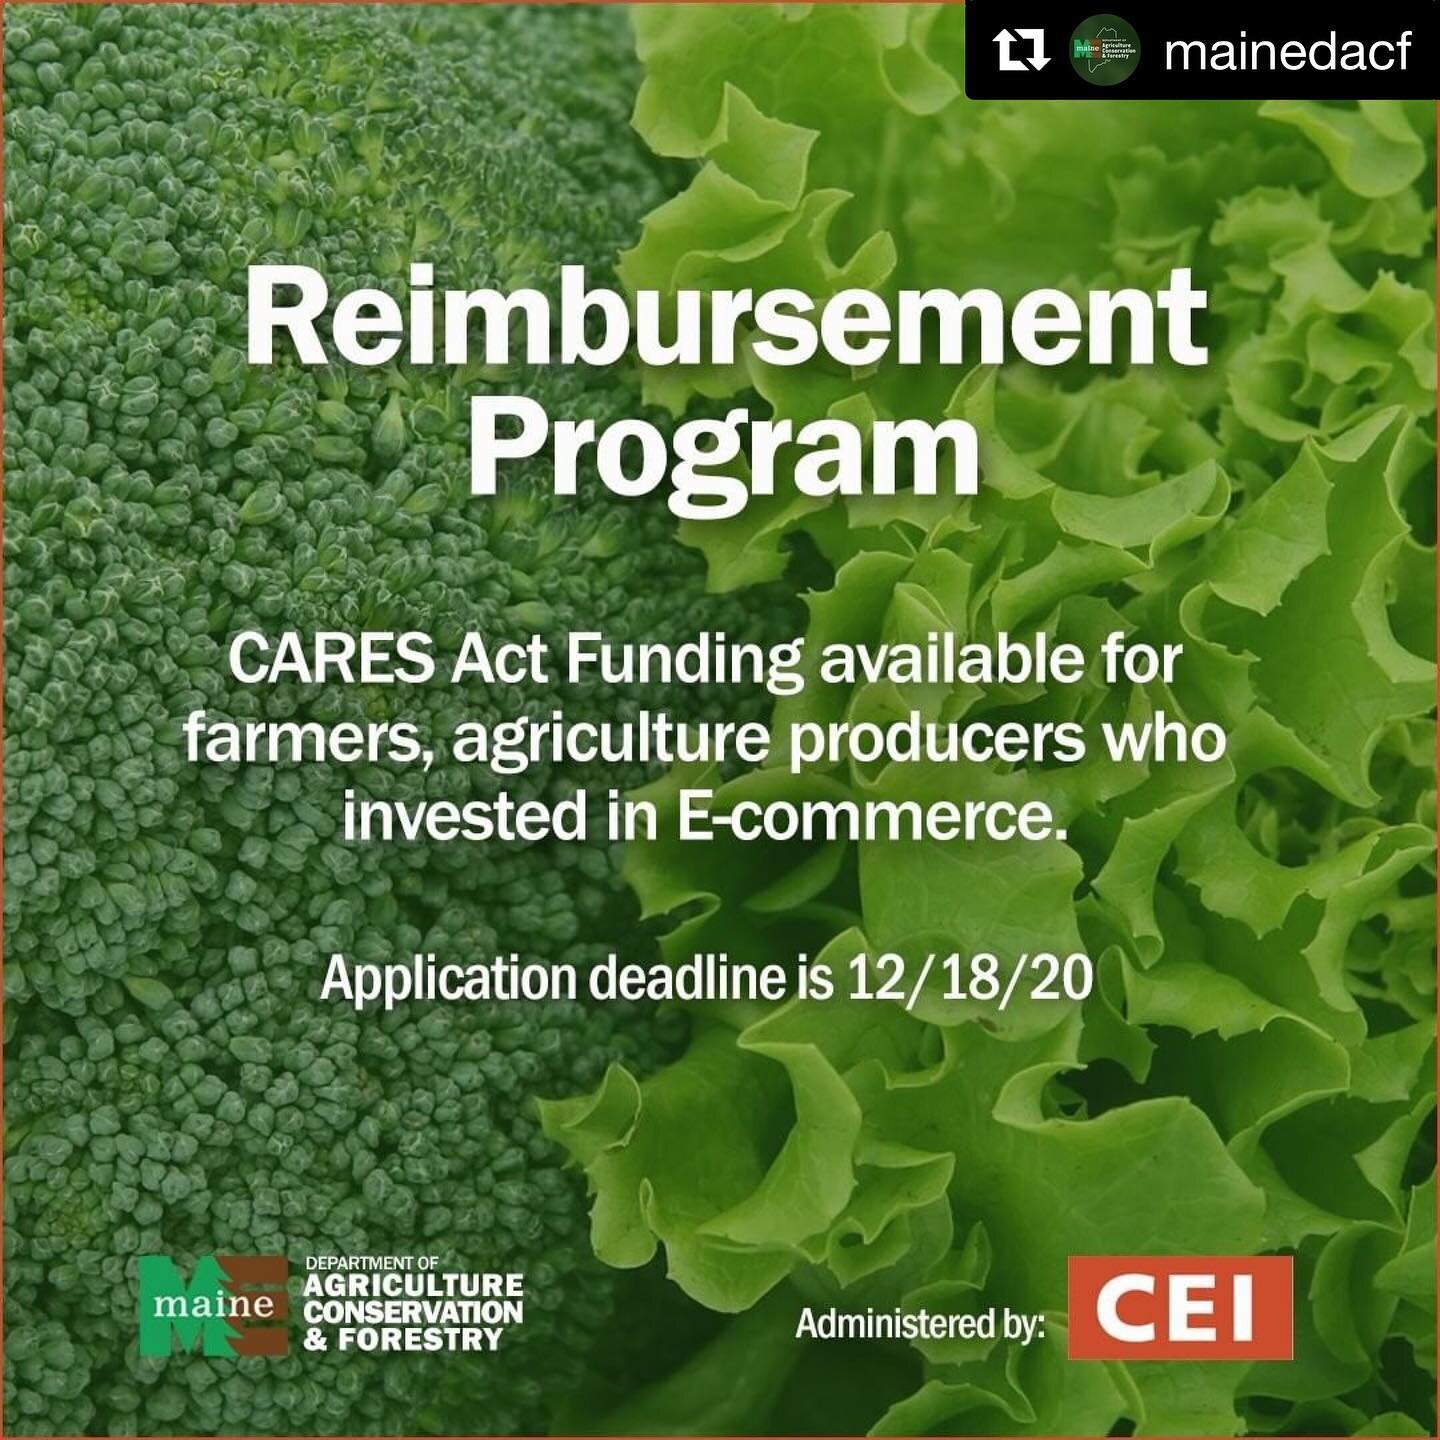 Through our BCDI COVID-19
Community Response Grant Fund we know there are many farmers and producers in our community who would be eligible for this funding. We hope you apply!!

#Repost @mainedacf
・・・
DACF has allocated CARES Act funds to reimburse 